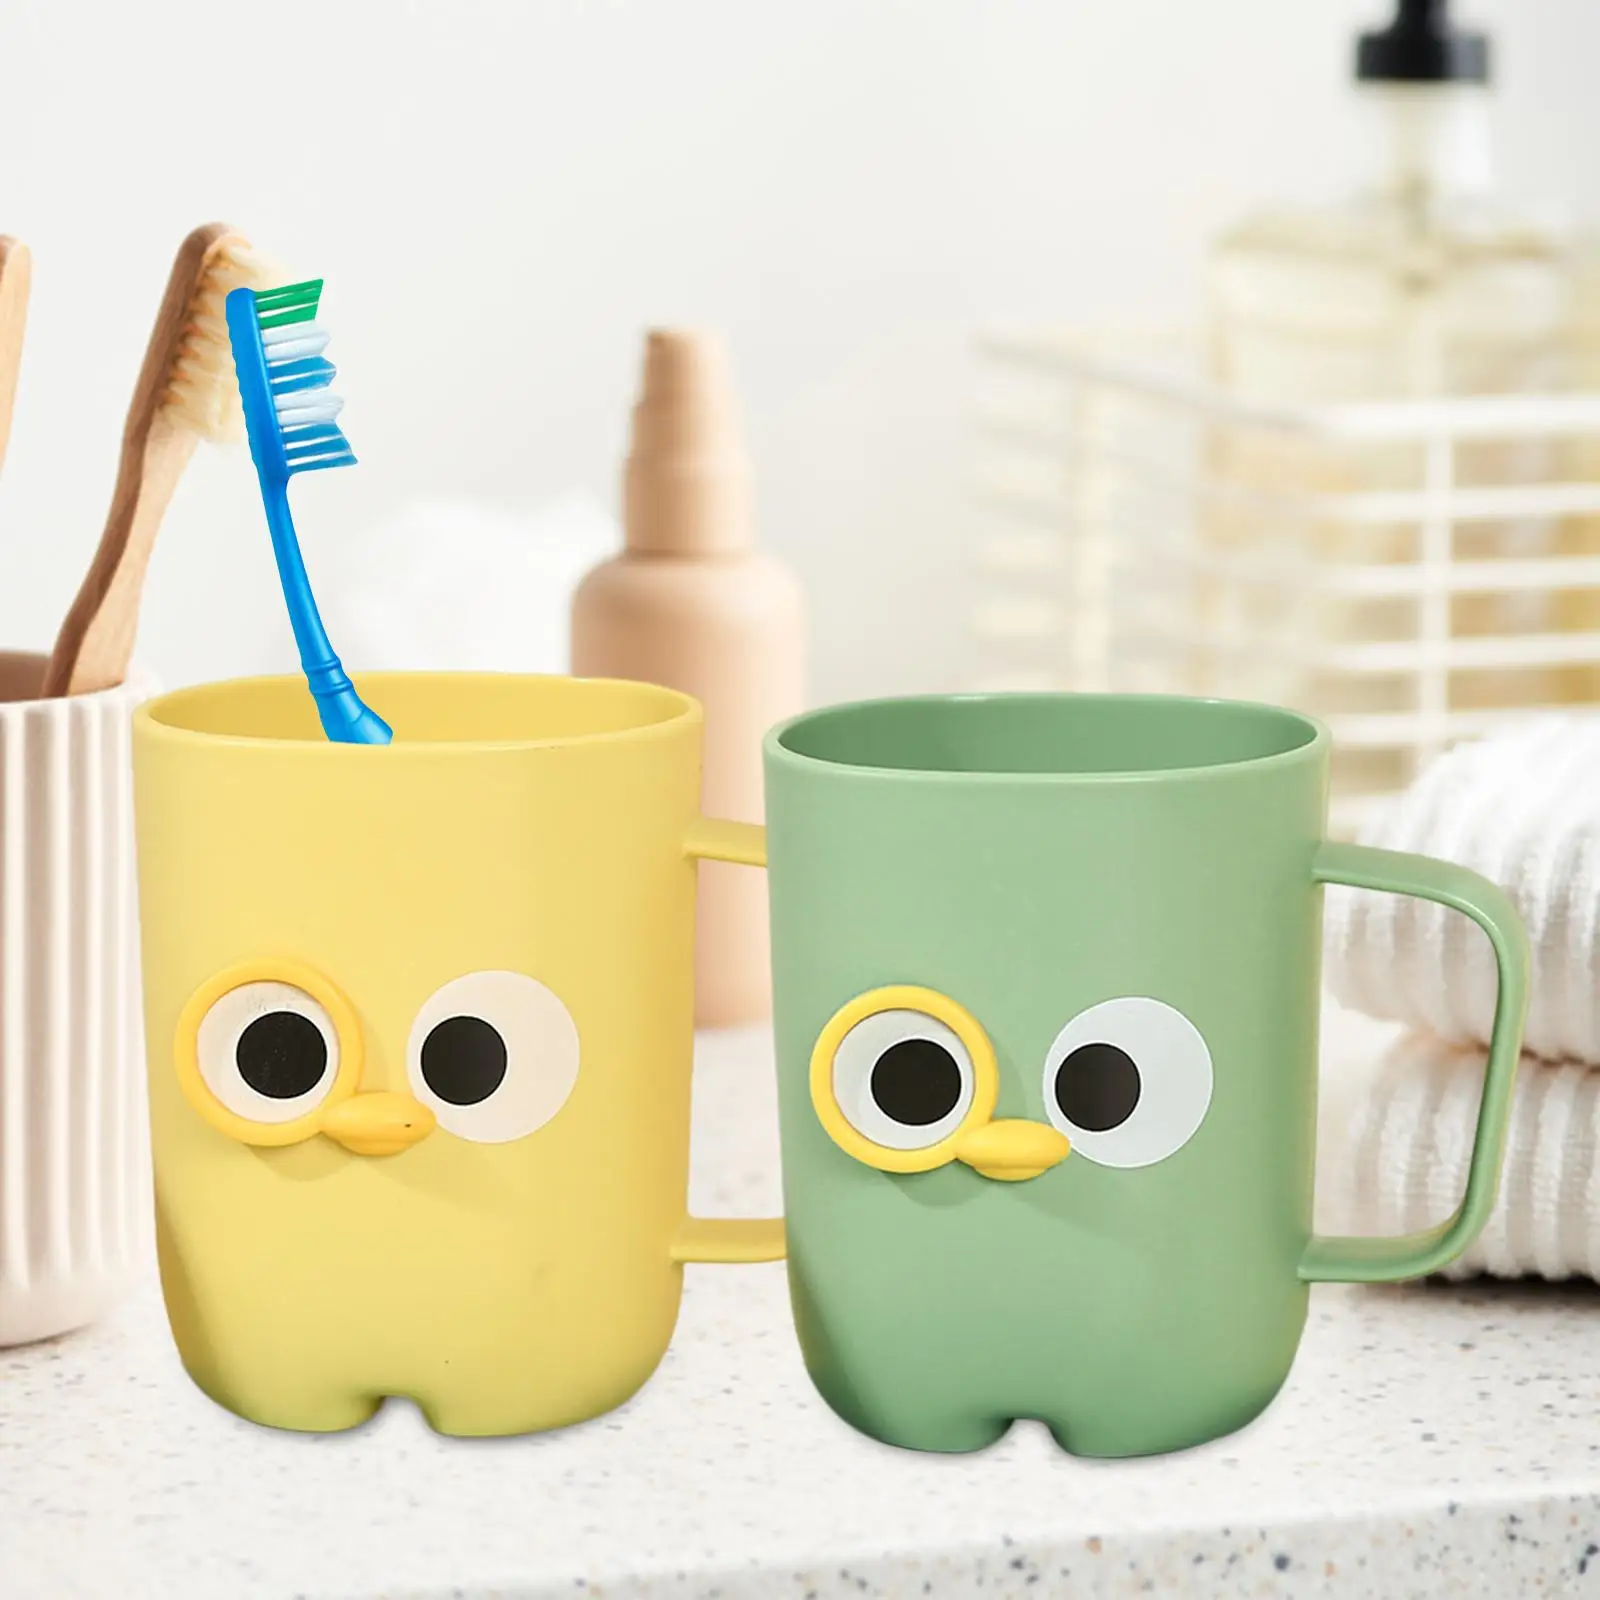 Toothbrush Holder Storage Washing Cup for Bathroom Home Boys Girls